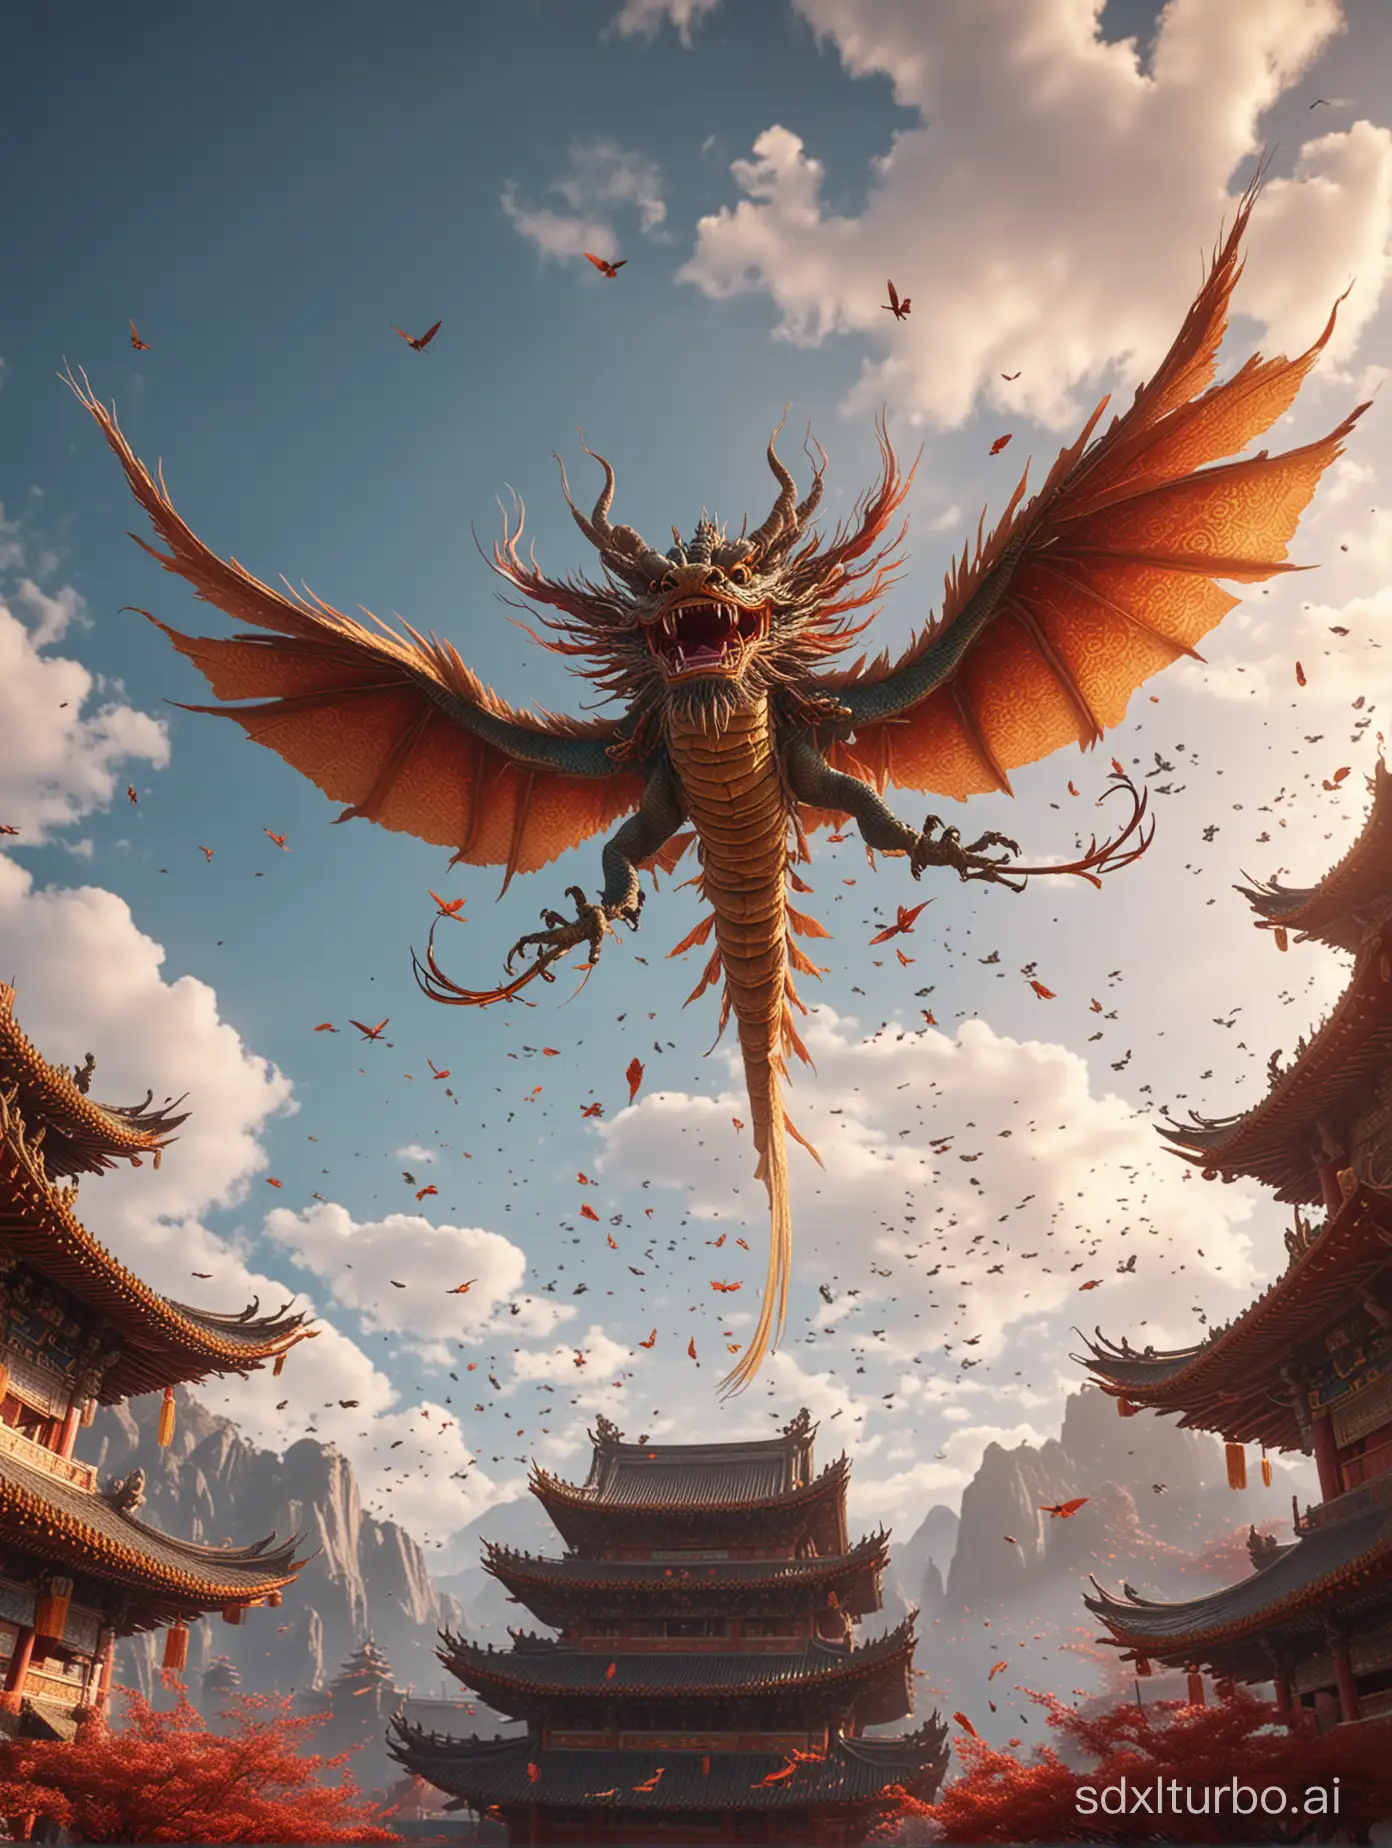 Colorful-Traditional-Chinese-Dragon-Soars-Against-Cinematic-Cyderpunk-Sky